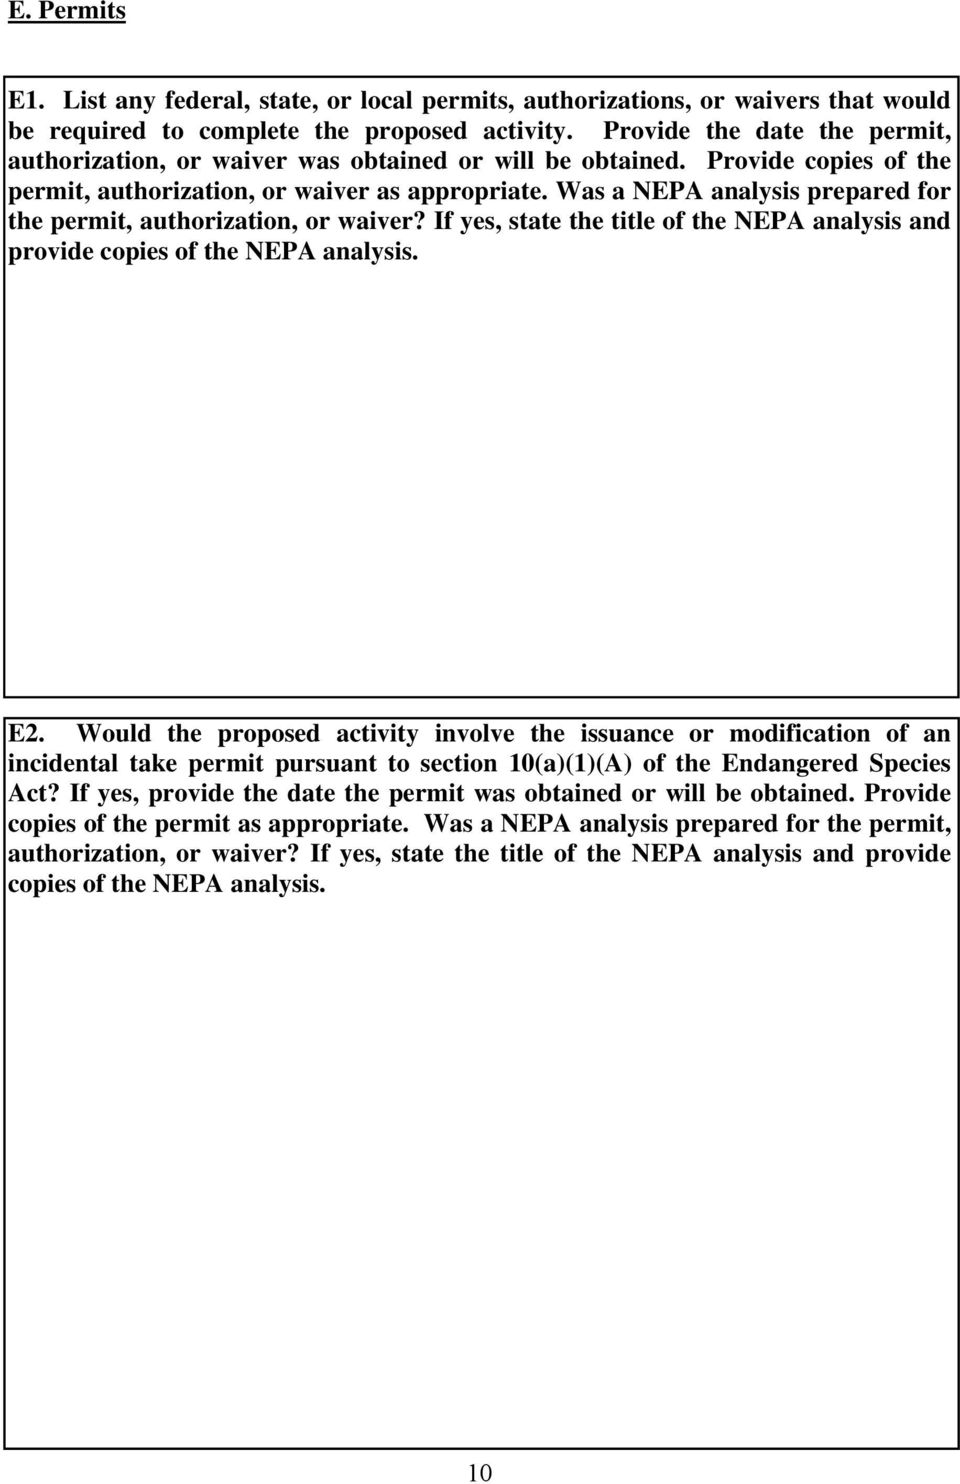 Was a NEPA analysis prepared for the permit, authorization, or waiver? If yes, state the title of the NEPA analysis and provide copies of the NEPA analysis. E2.